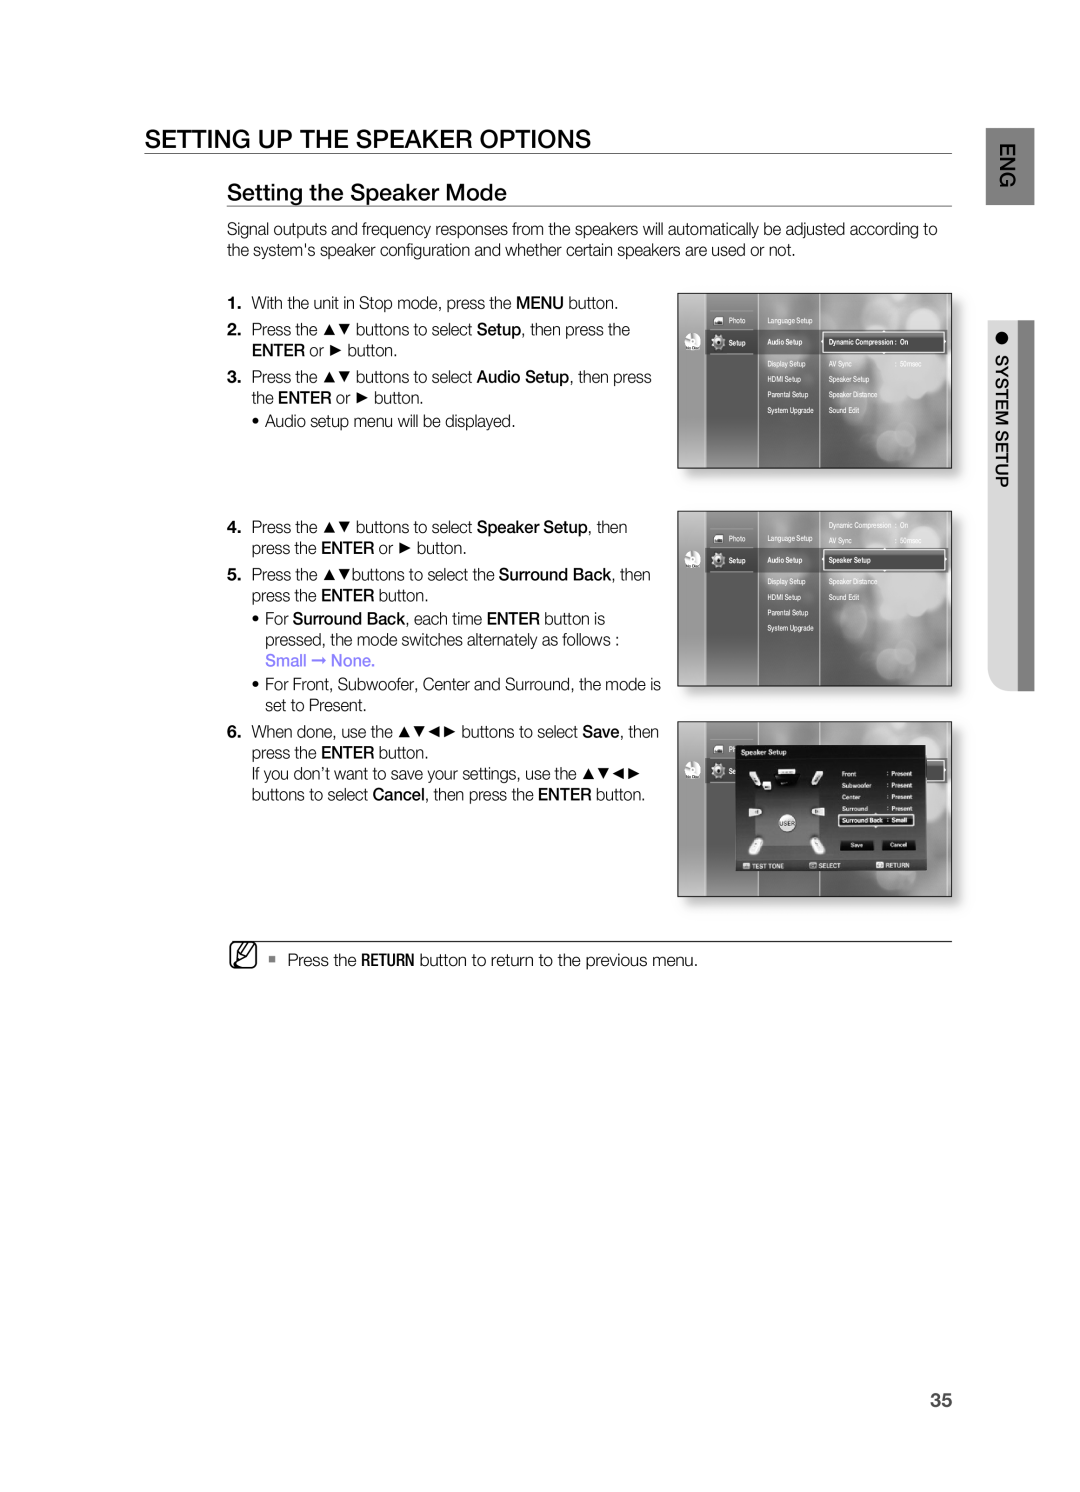 Samsung AH68-02019S manual SETTIng UP THE SPEAKER OPTIOnS, Setting the Speaker Mode, Small none 